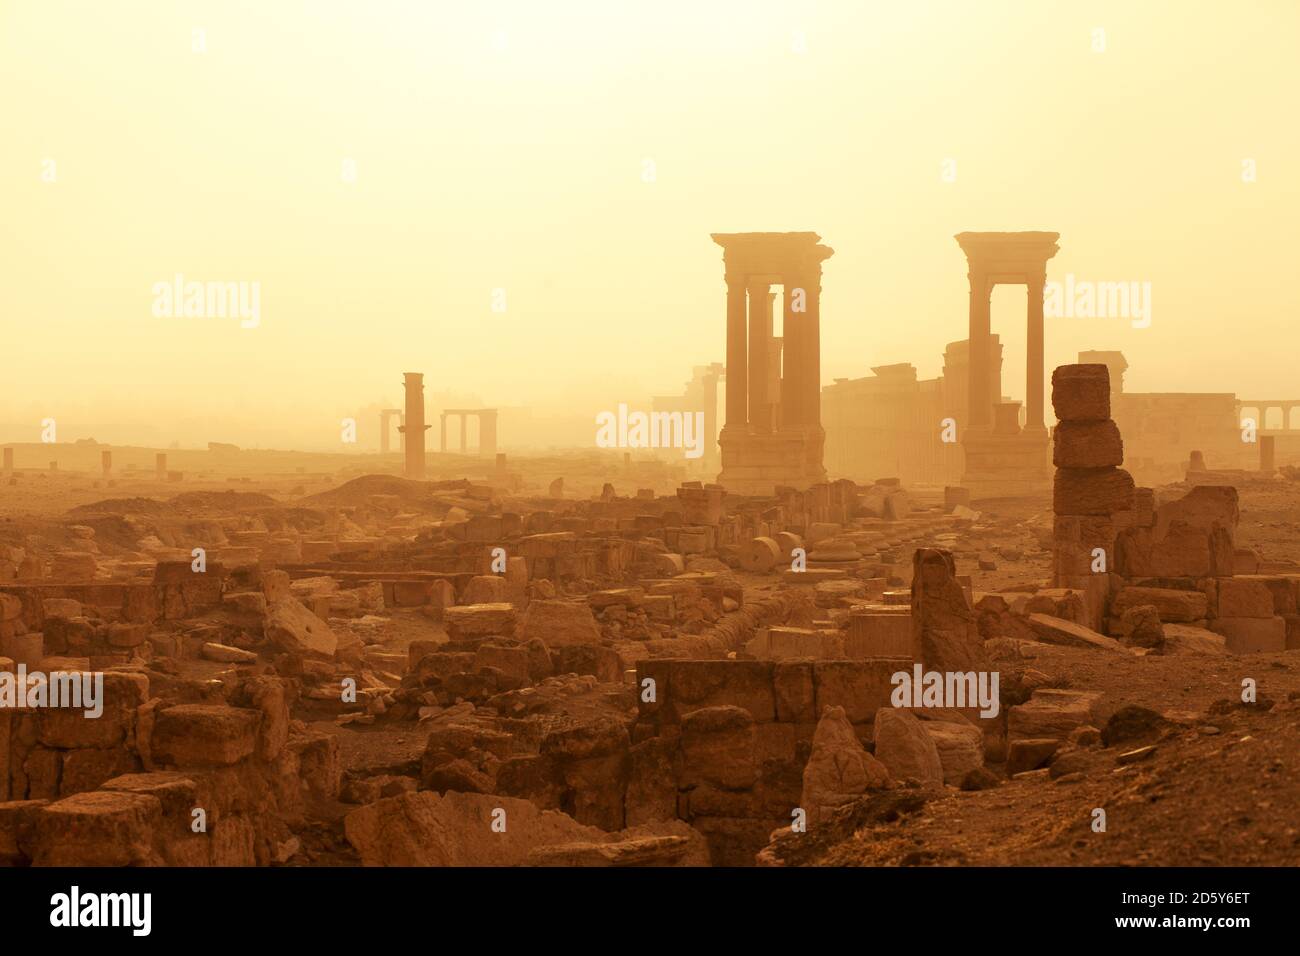 Syria, Homs Governorate, Palmyra,Temple of Bel Stock Photo